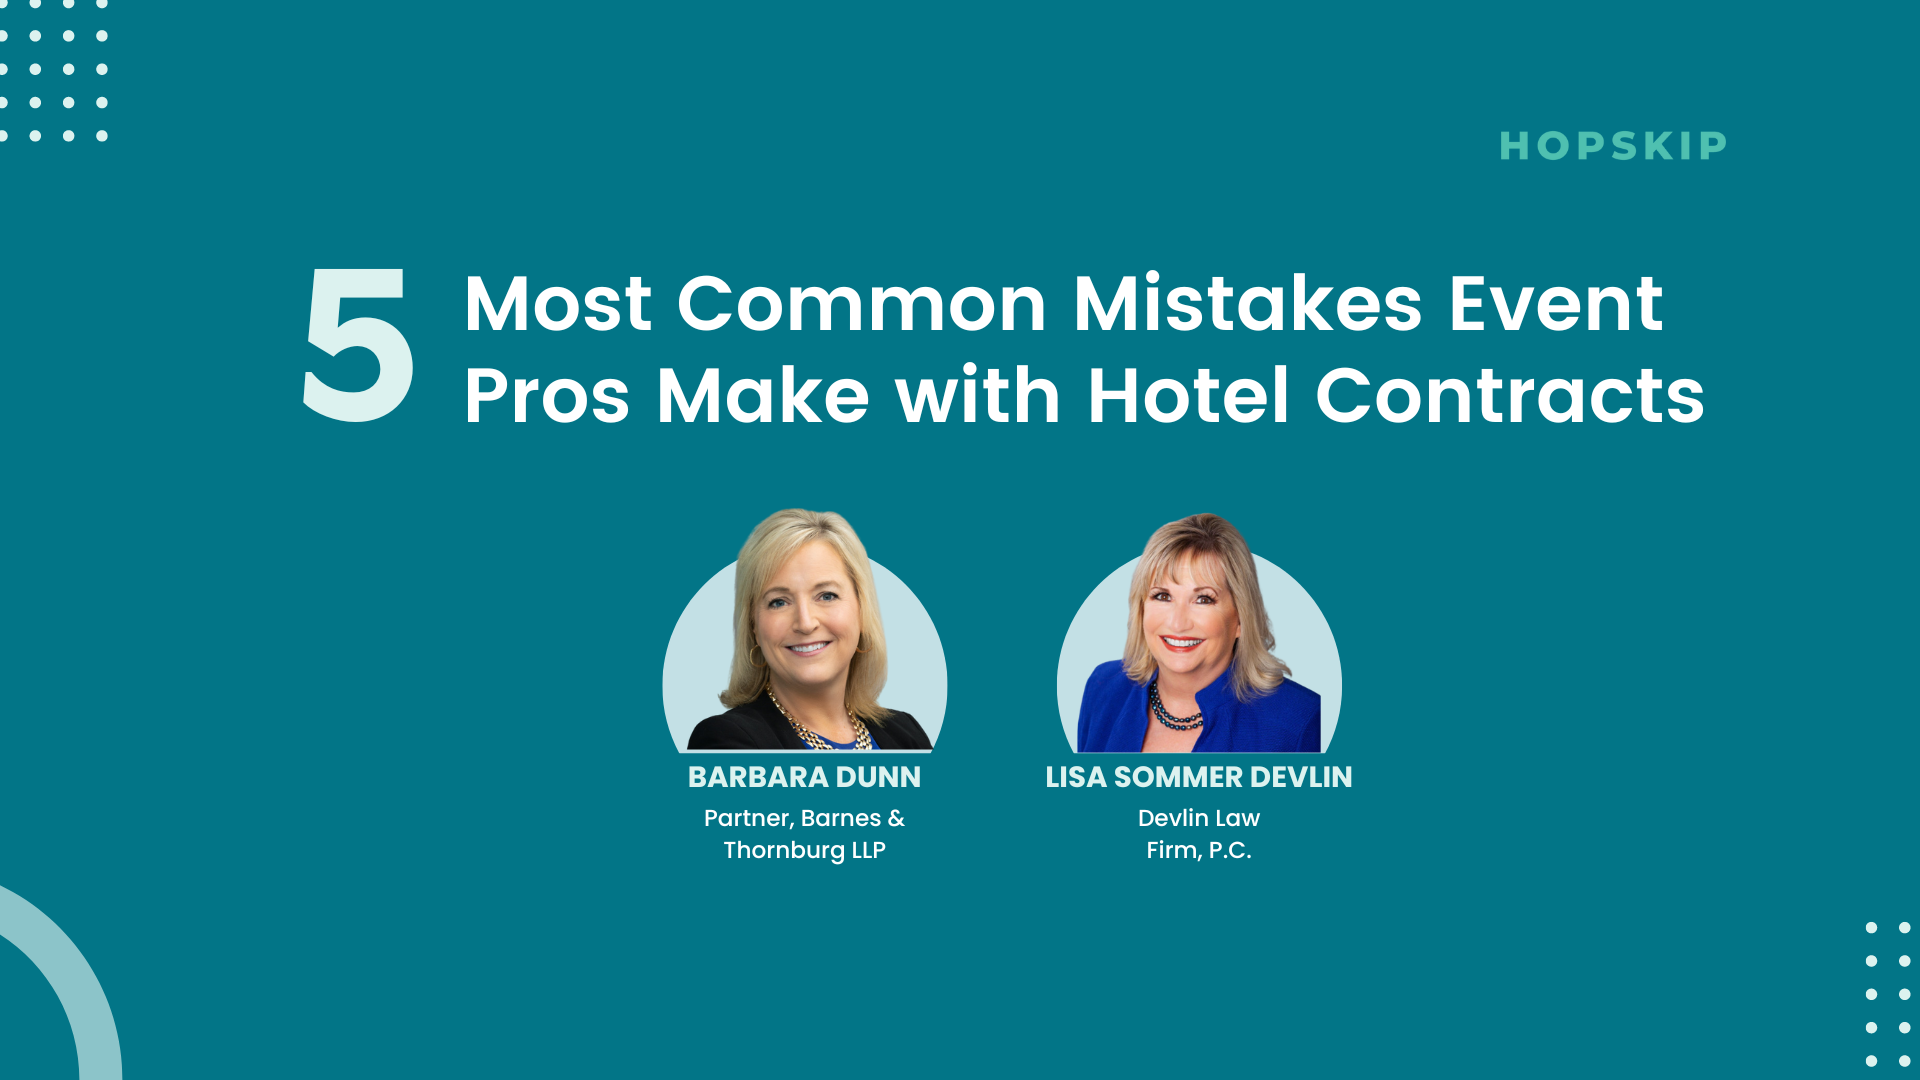 5 Most Common Mistakes Event Pros Make with Hotel Contracts